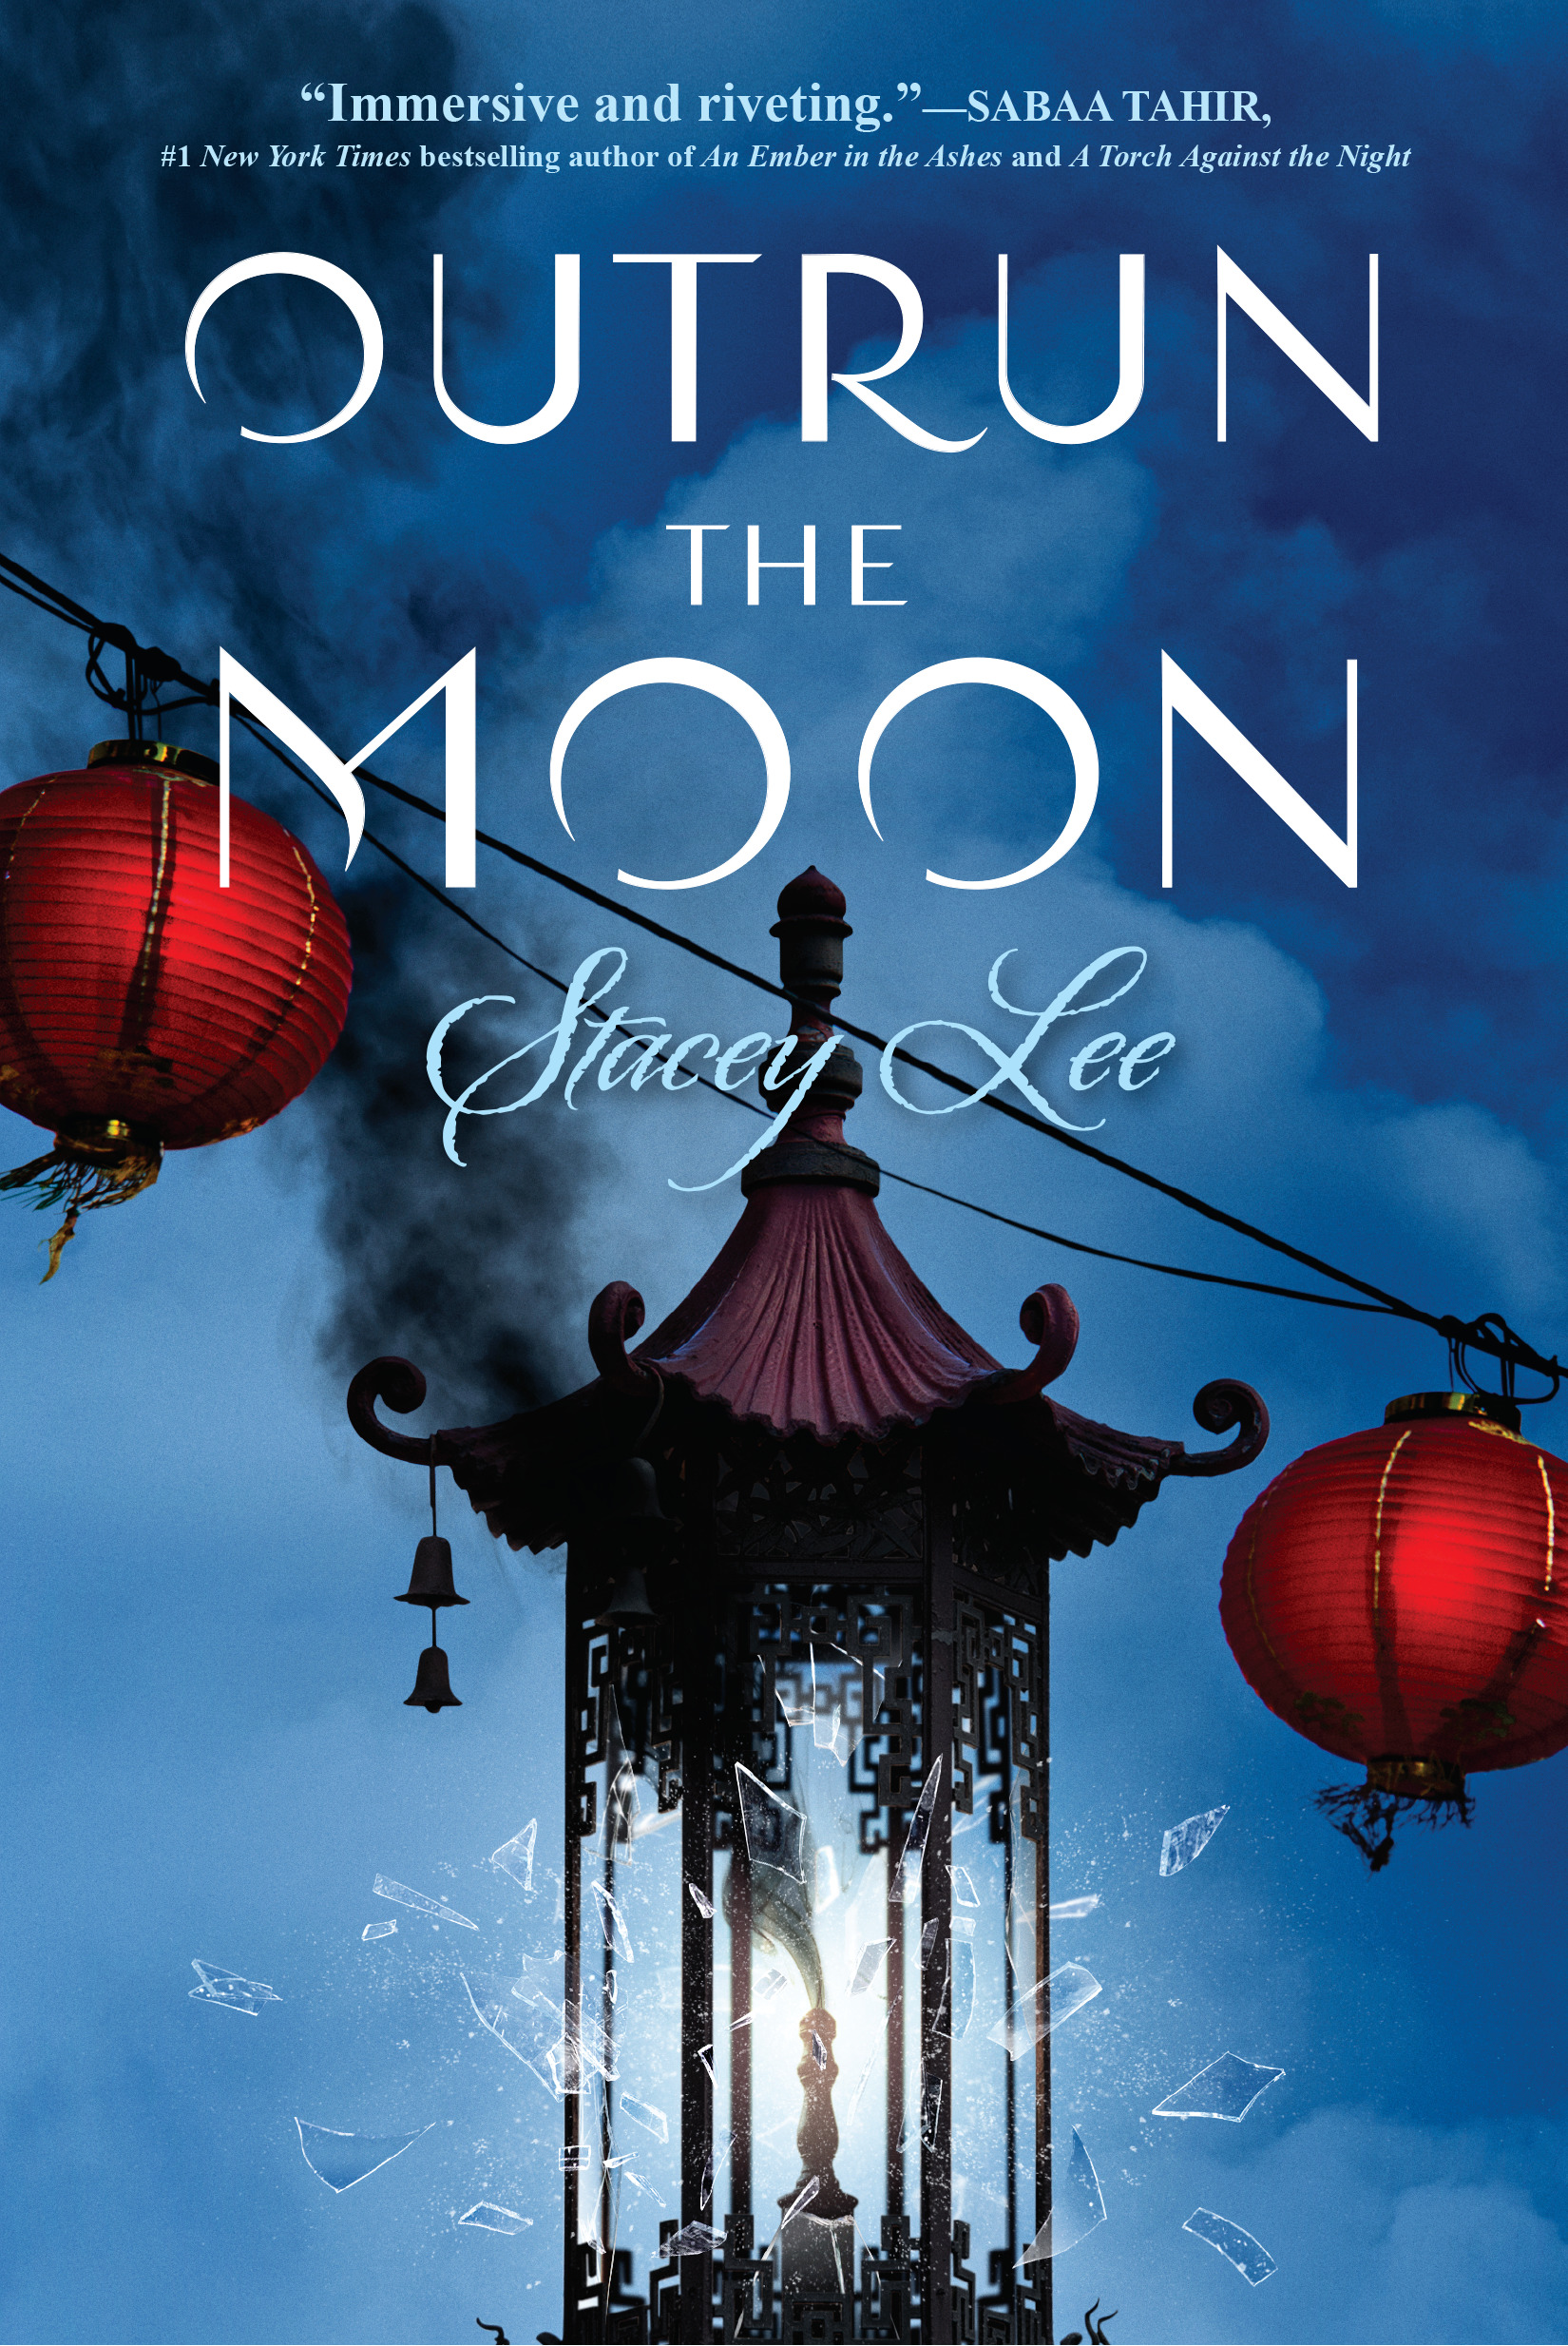 Outrun the Moon | Lee, Stacey